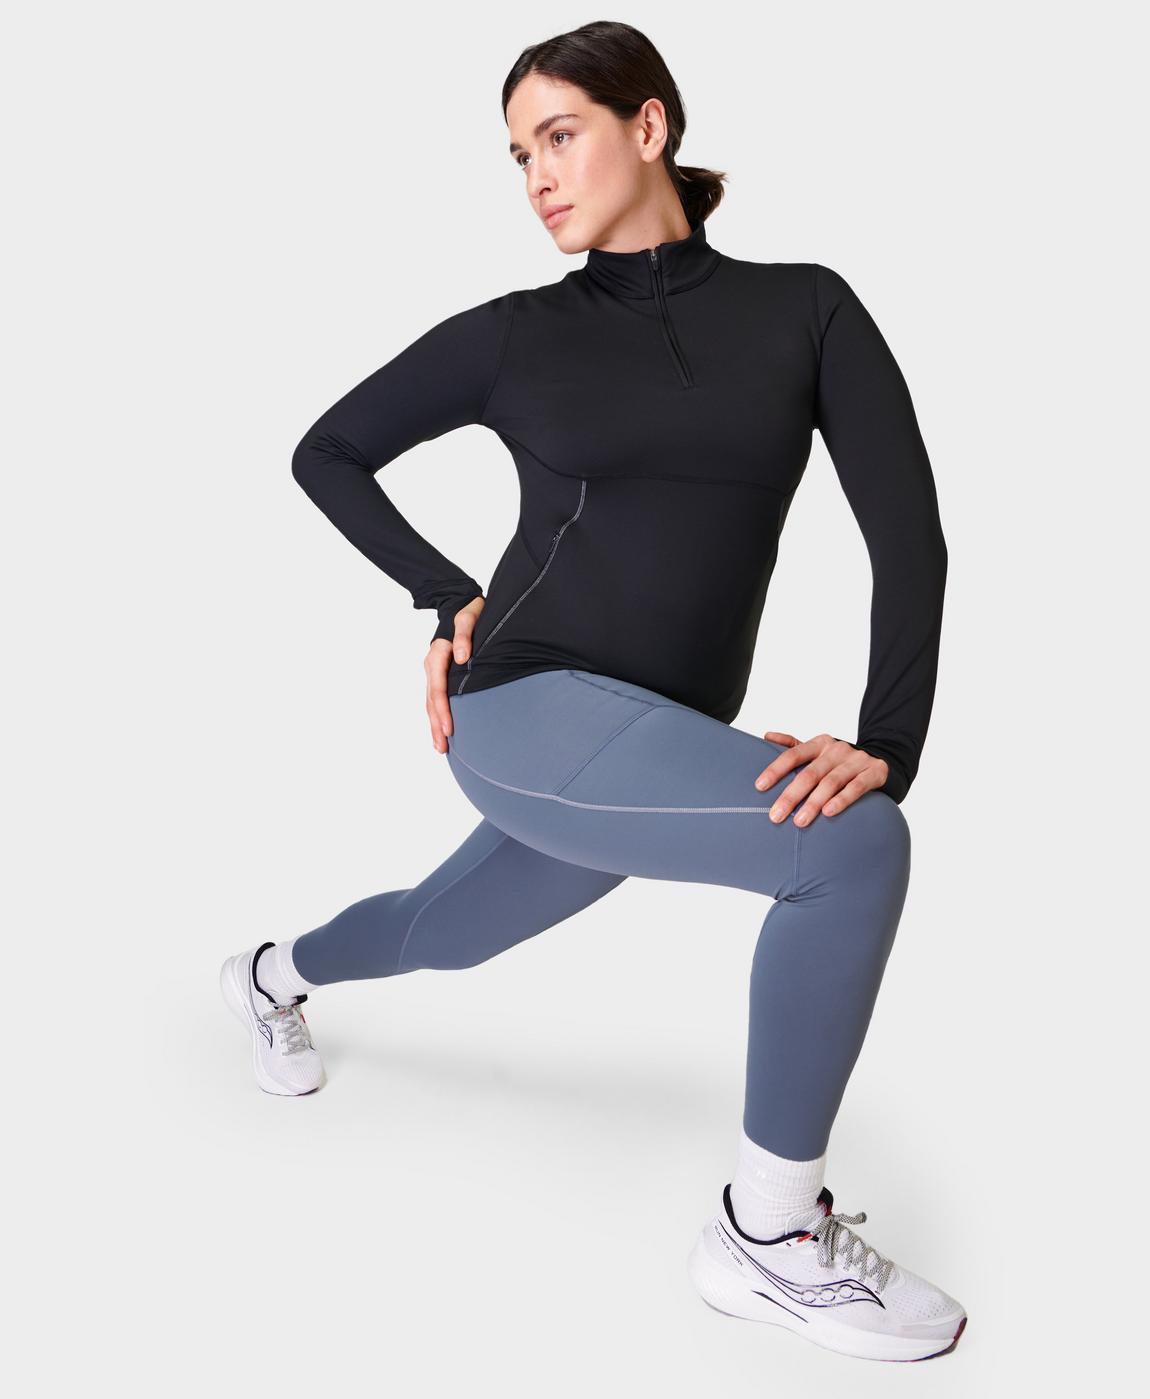 Therma Boost 2.0 Reflective Running Leggings - Endless Blue